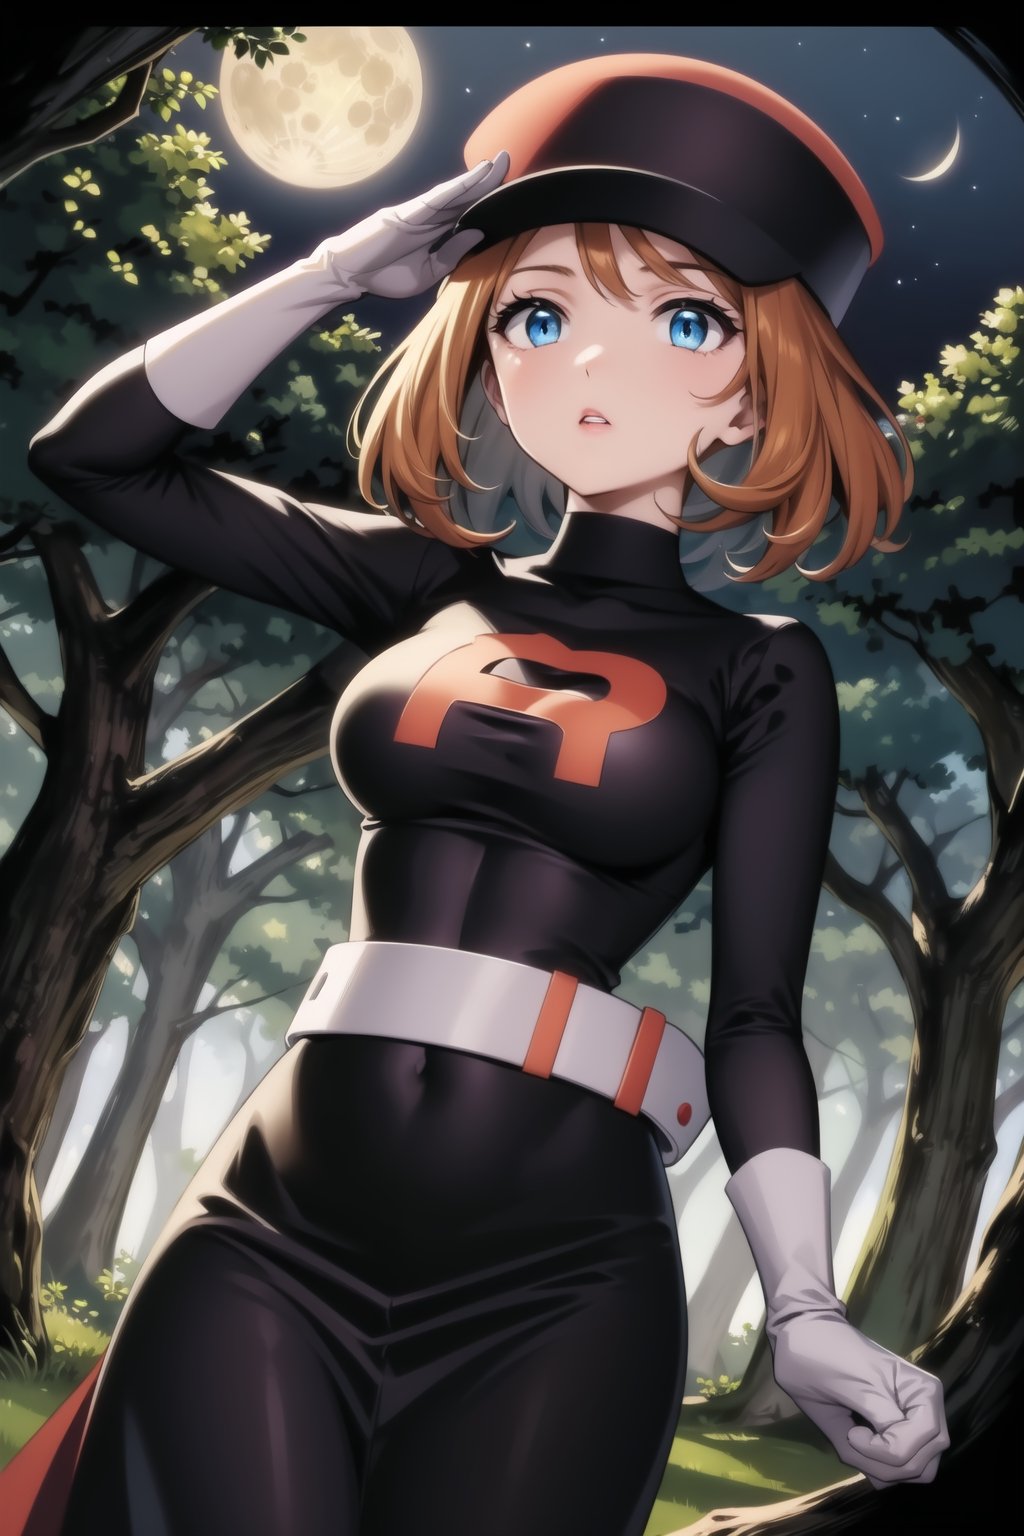 A masterpiece of ((highly detailed)) official art depicts Serena from Grunt Team Rocket standing solo amidst the mystical ambiance of a moonlit forest. Her orange hair cascades down her back, framed by a cabbie hat and bangs, while blue eyes gleam in the darkness. She wears a black dress with long sleeves, elbow gloves, and a grey belt, her expressionless face parted lips slightly open. The surrounding trees tower above, their branches like outstretched arms, as Serena stands at attention, her posture a salute to the mysterious night.